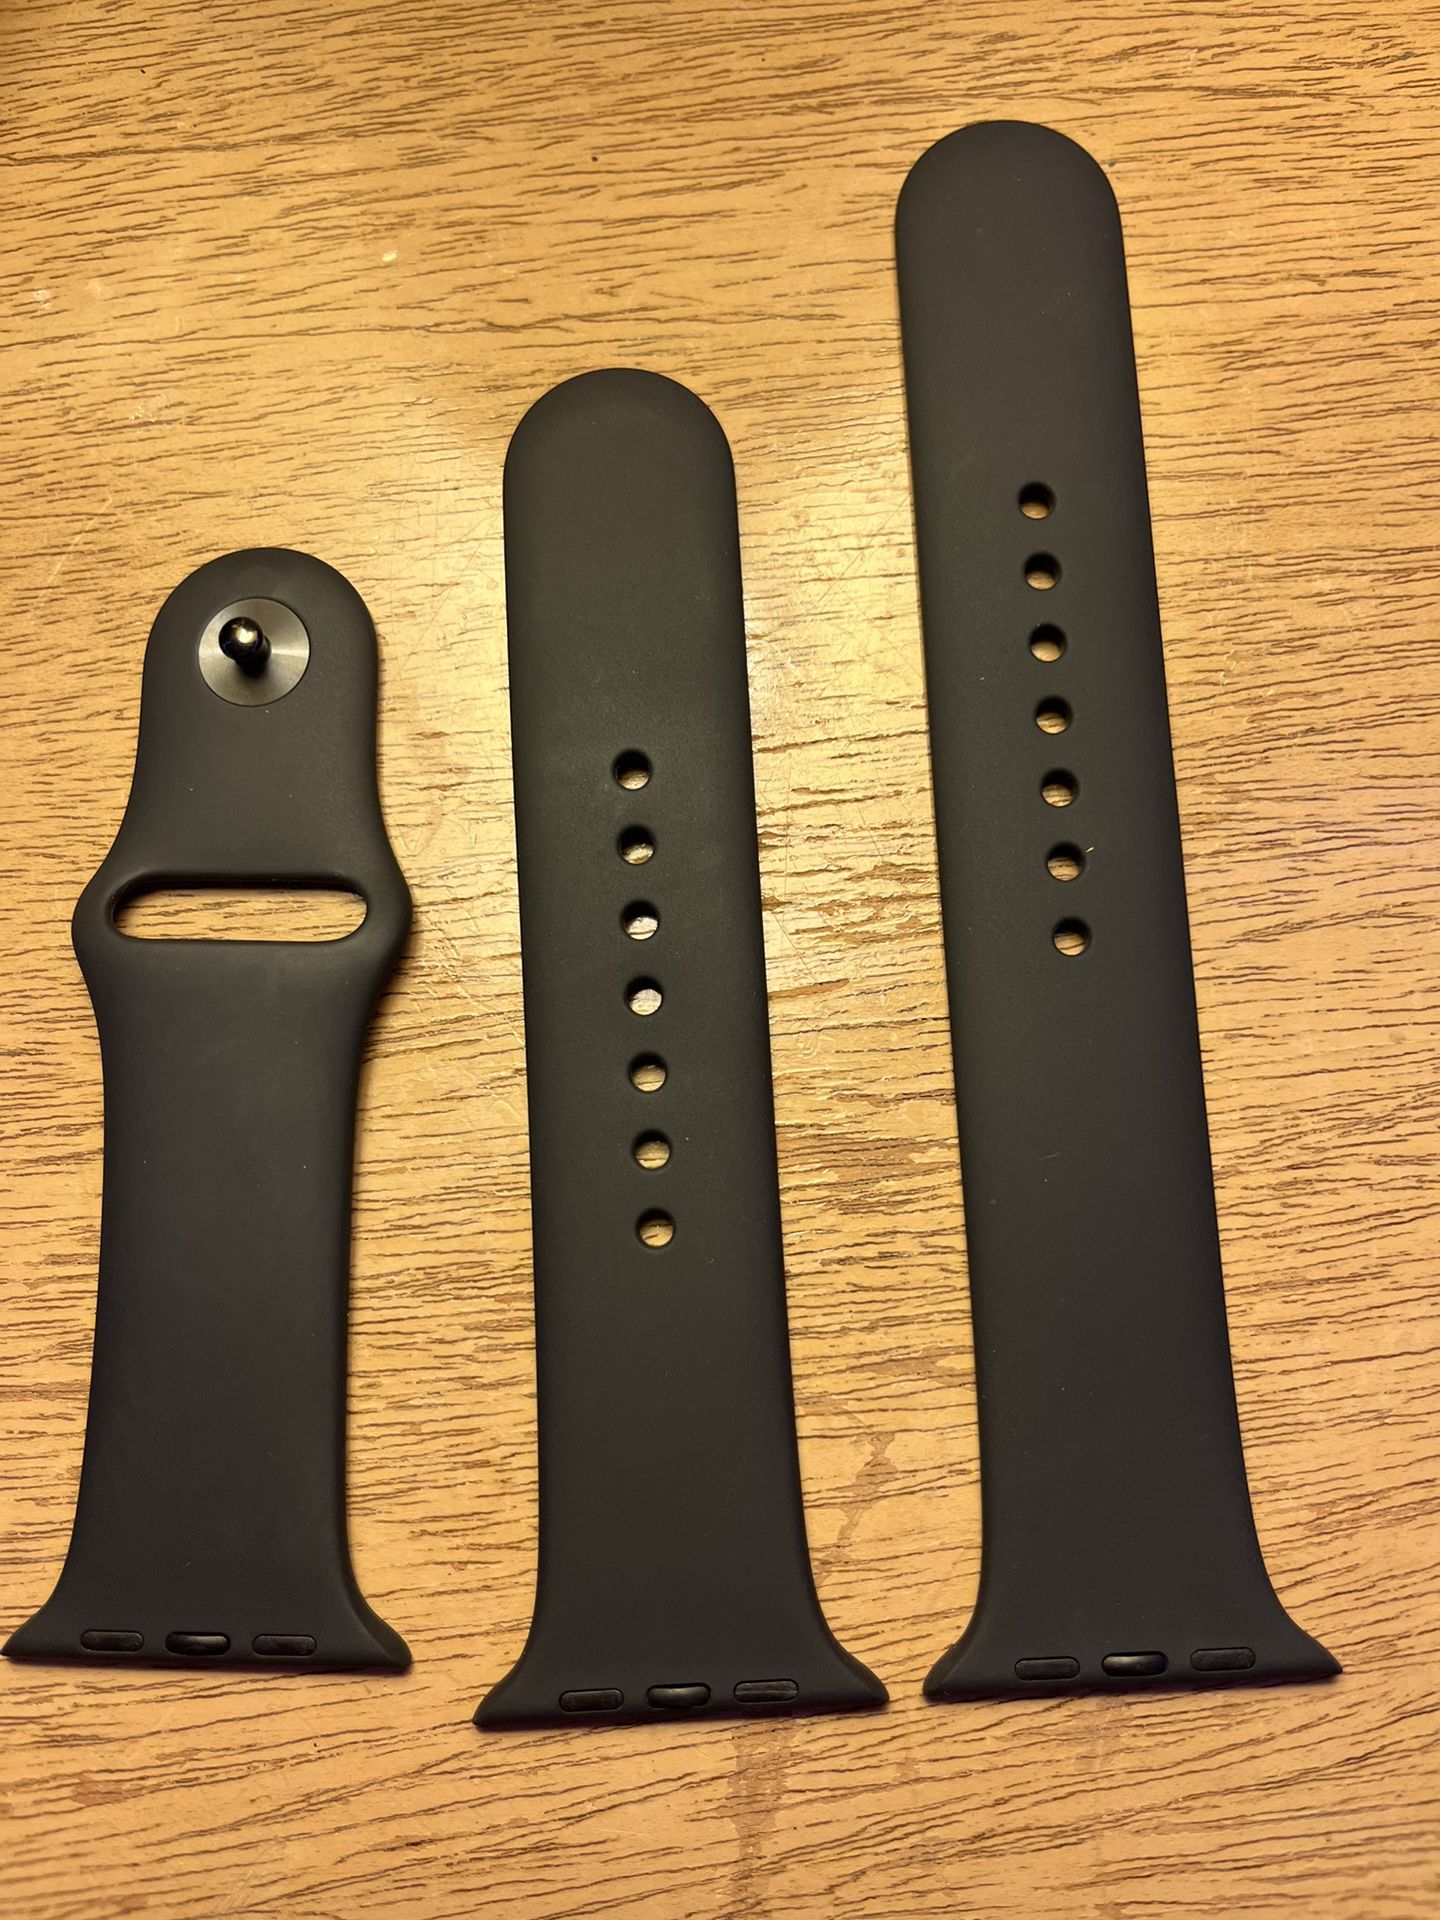 Apple Brand 42 mm Black Apple Watch Bands (Includes M/S And M/L Size Bands)